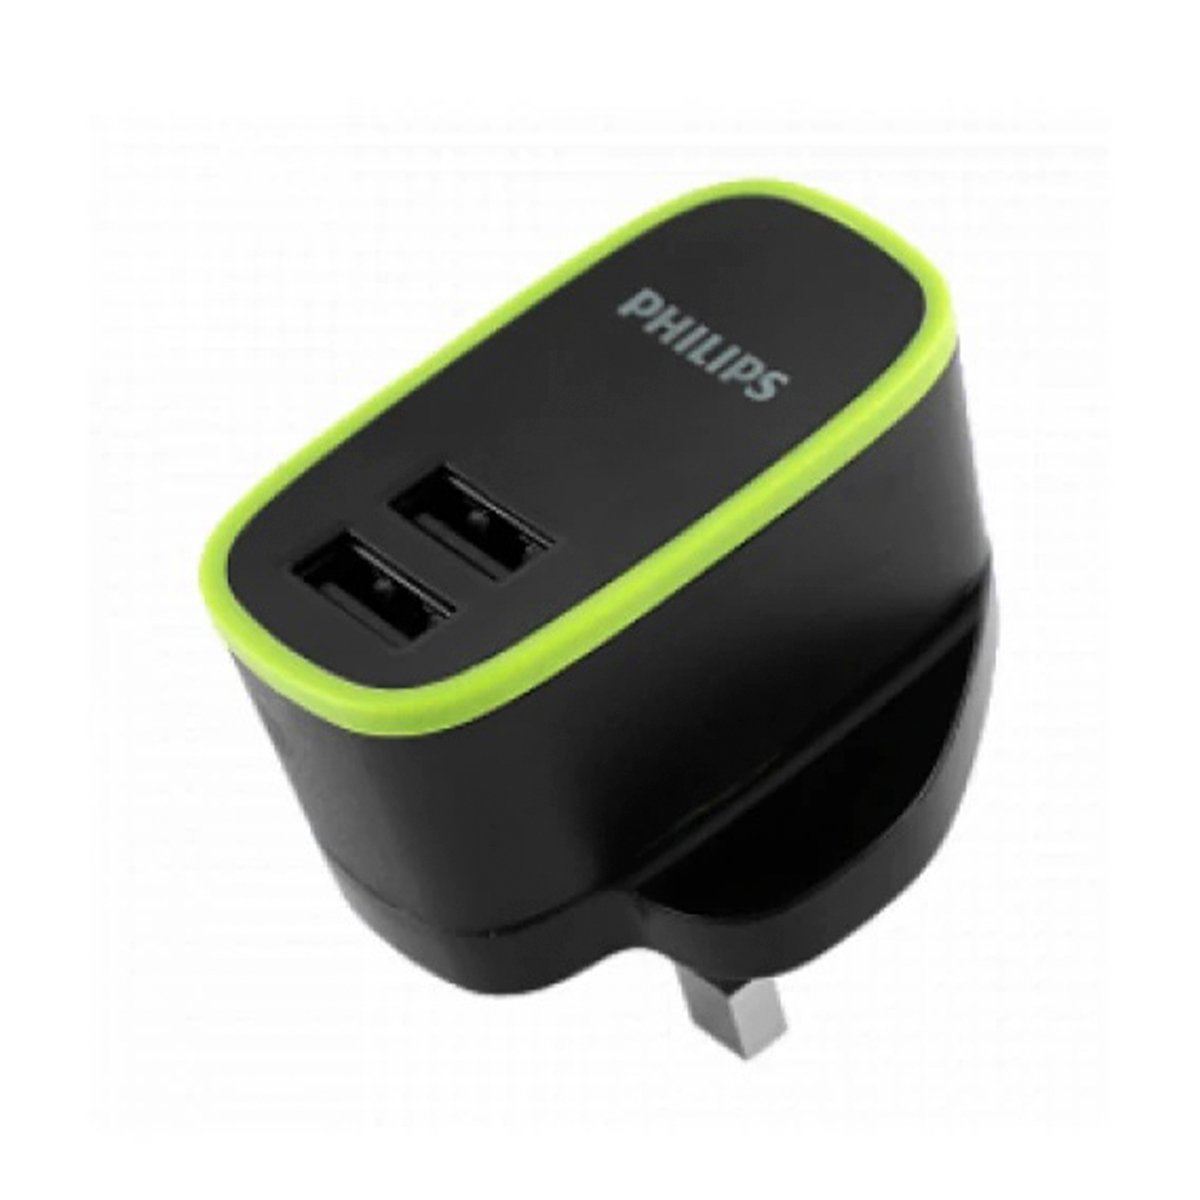 Philips Dual Port Wall Charger DLP2503